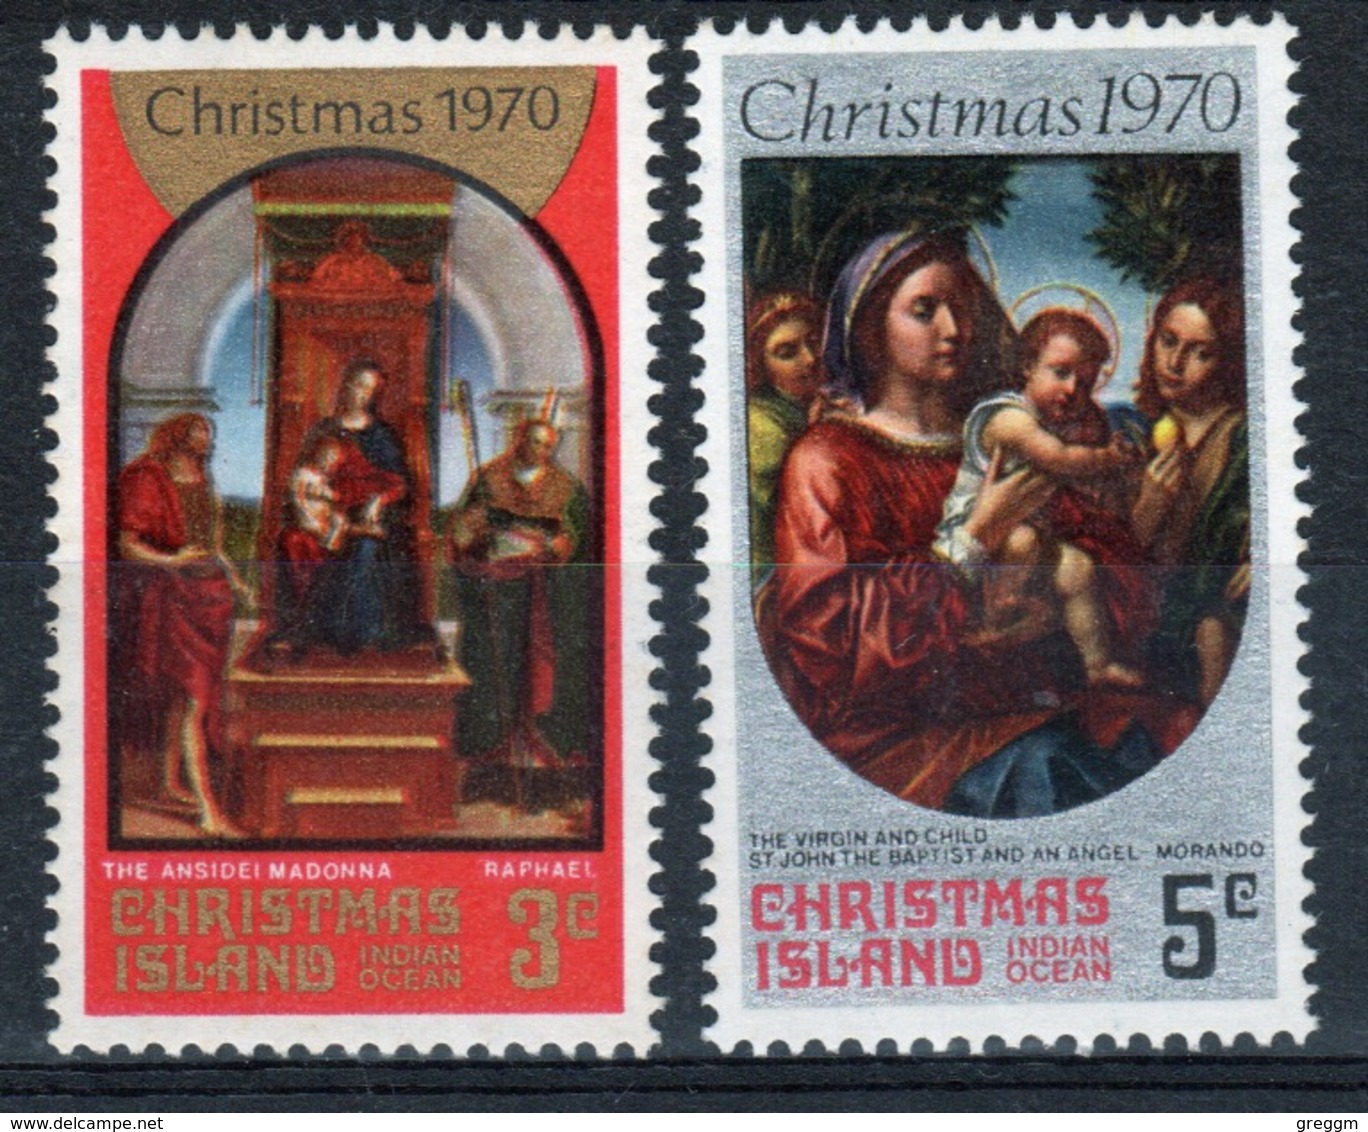 Christmas Island Set Of Stamps To Celebrate Christmas 1970. - Christmas Island